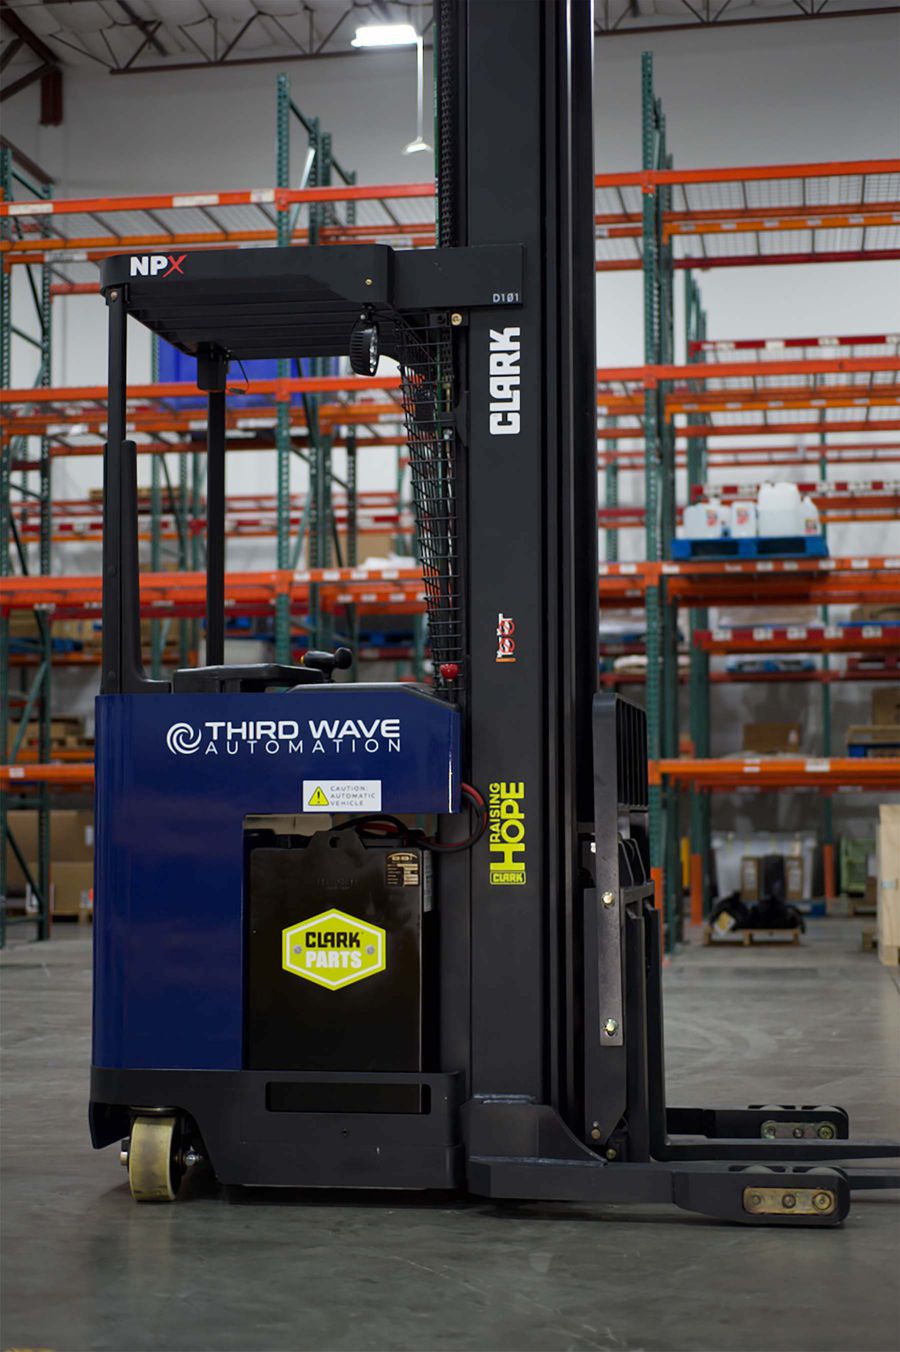 Third Wave Automation and Clark Material Handling launch Autonomous Forklift